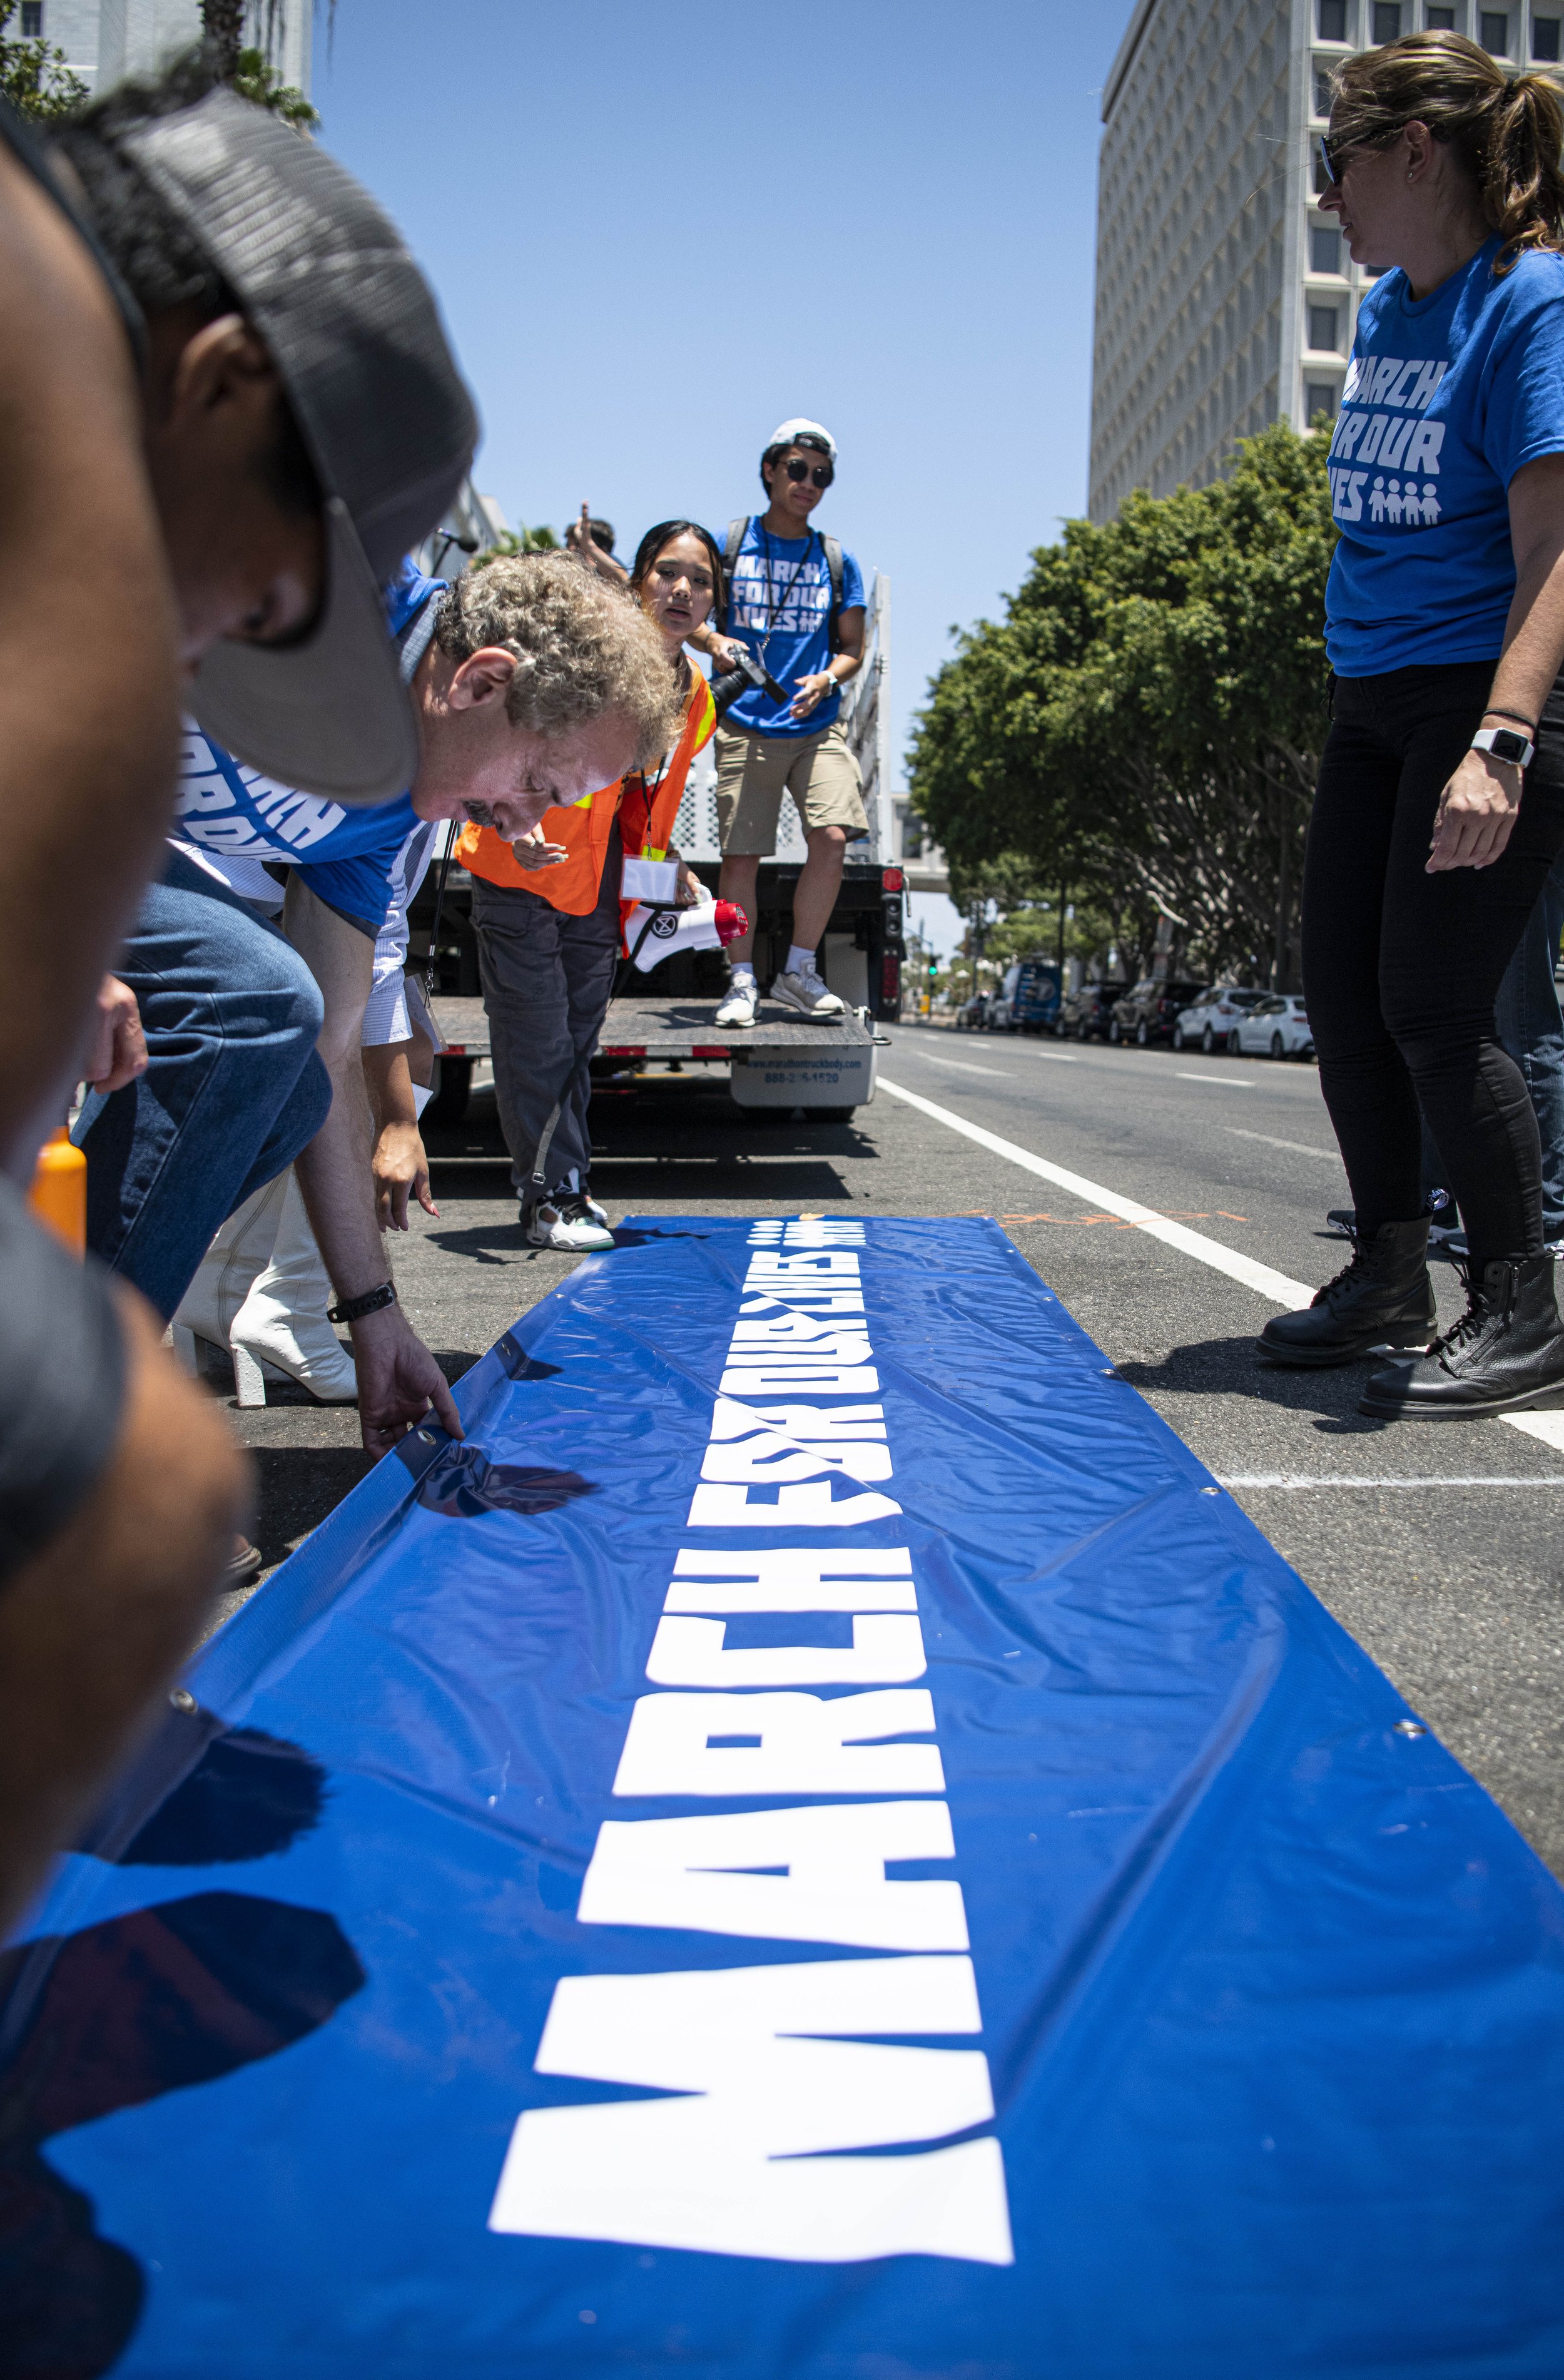  March for our lives supporters ready the banner that will be used in the peaceful protest in the streets of downtown Los Angeles. (Jon Putman | The Corsair) 